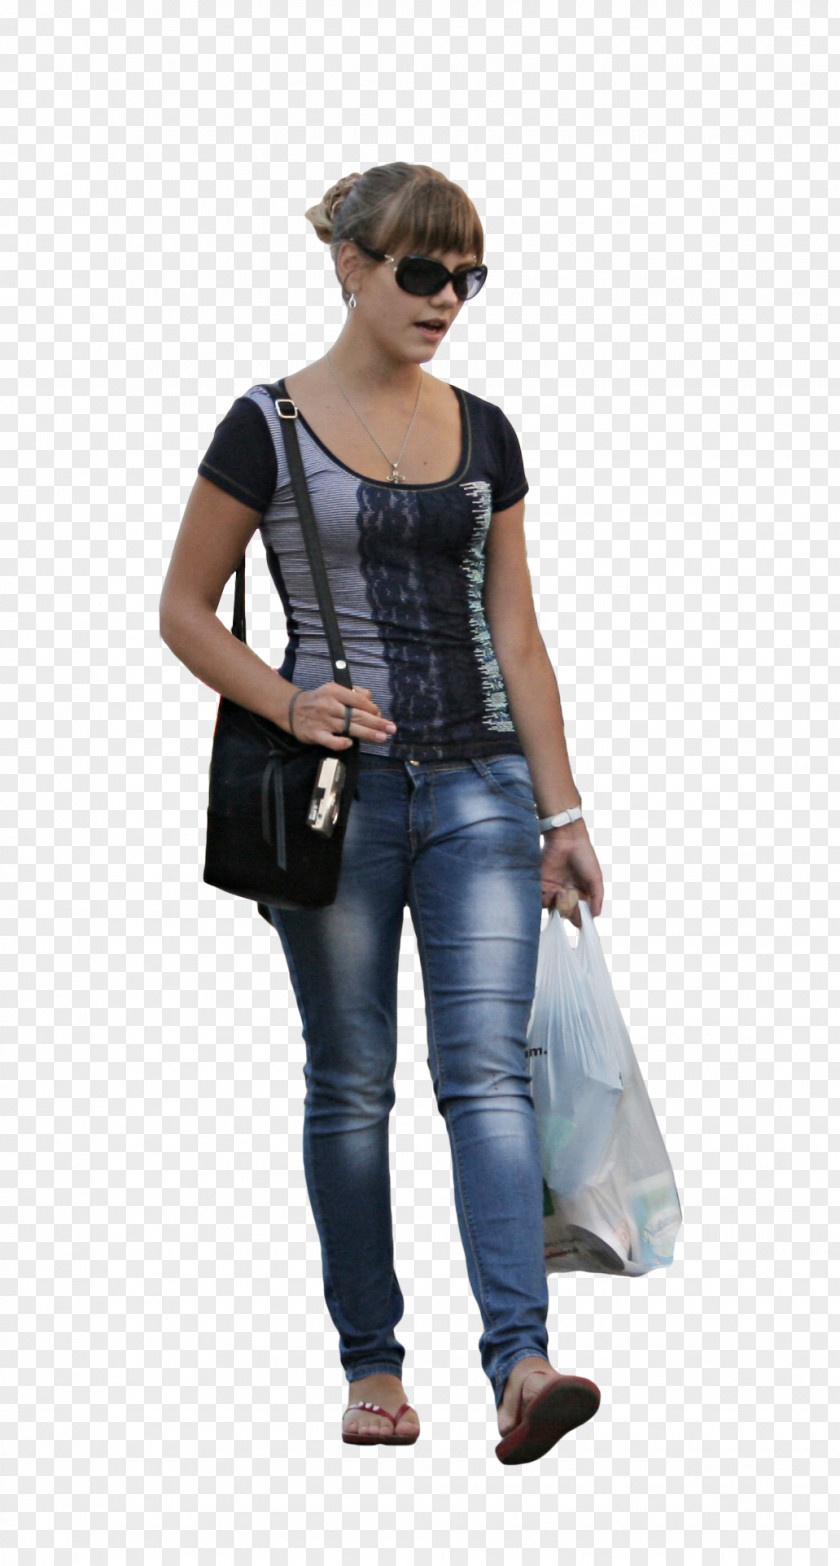 Women Bag Clothing Alpha Compositing PNG